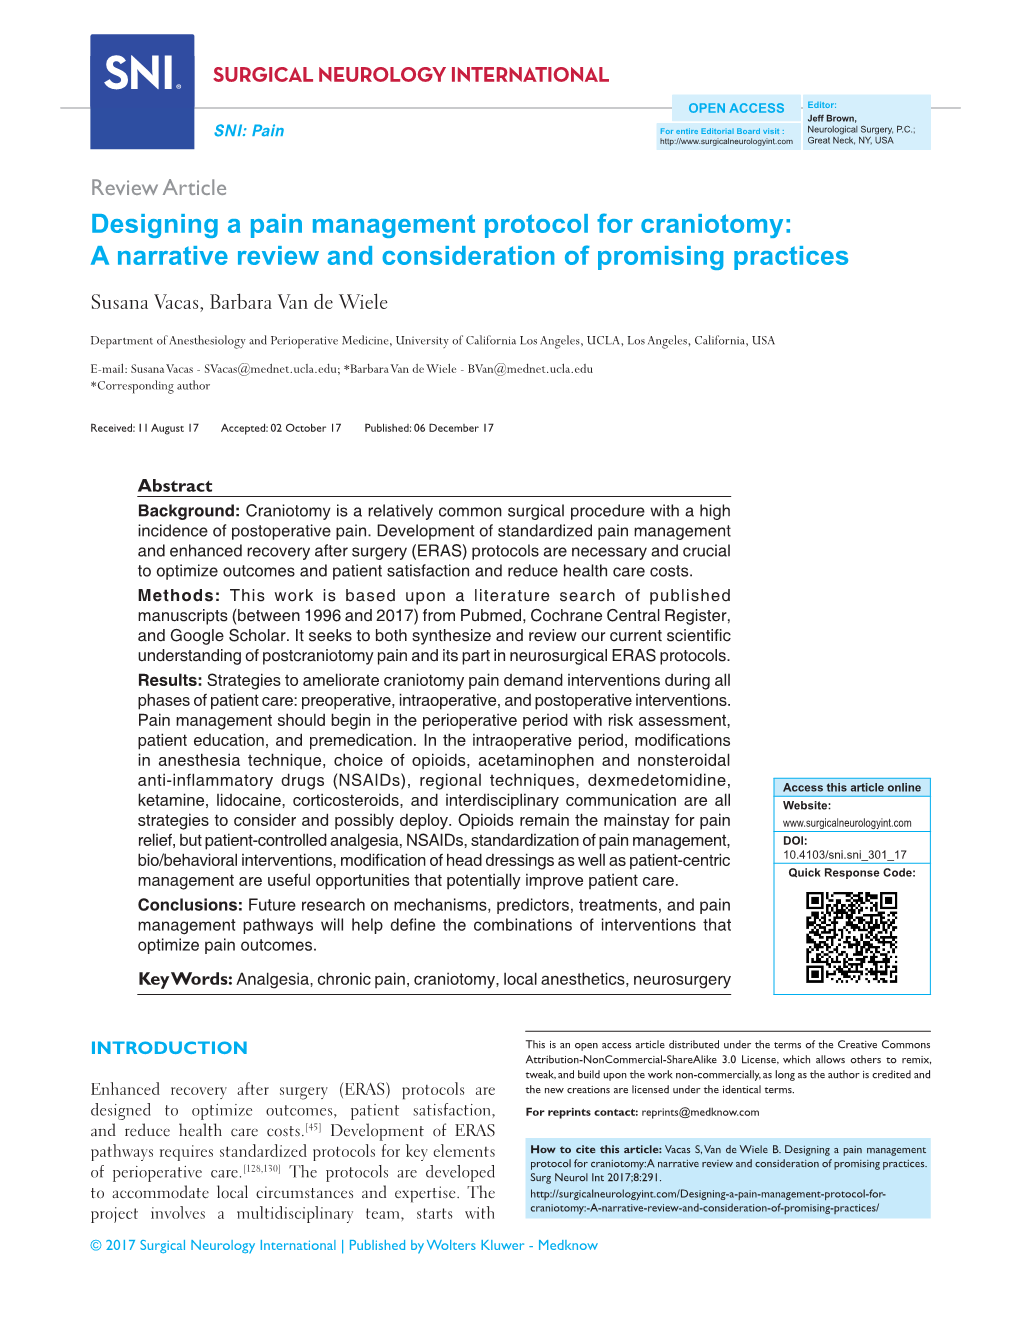 Designing a Pain Management Protocol for Craniotomy: a Narrative Review and Consideration of Promising Practices Susana Vacas, Barbara Van De Wiele